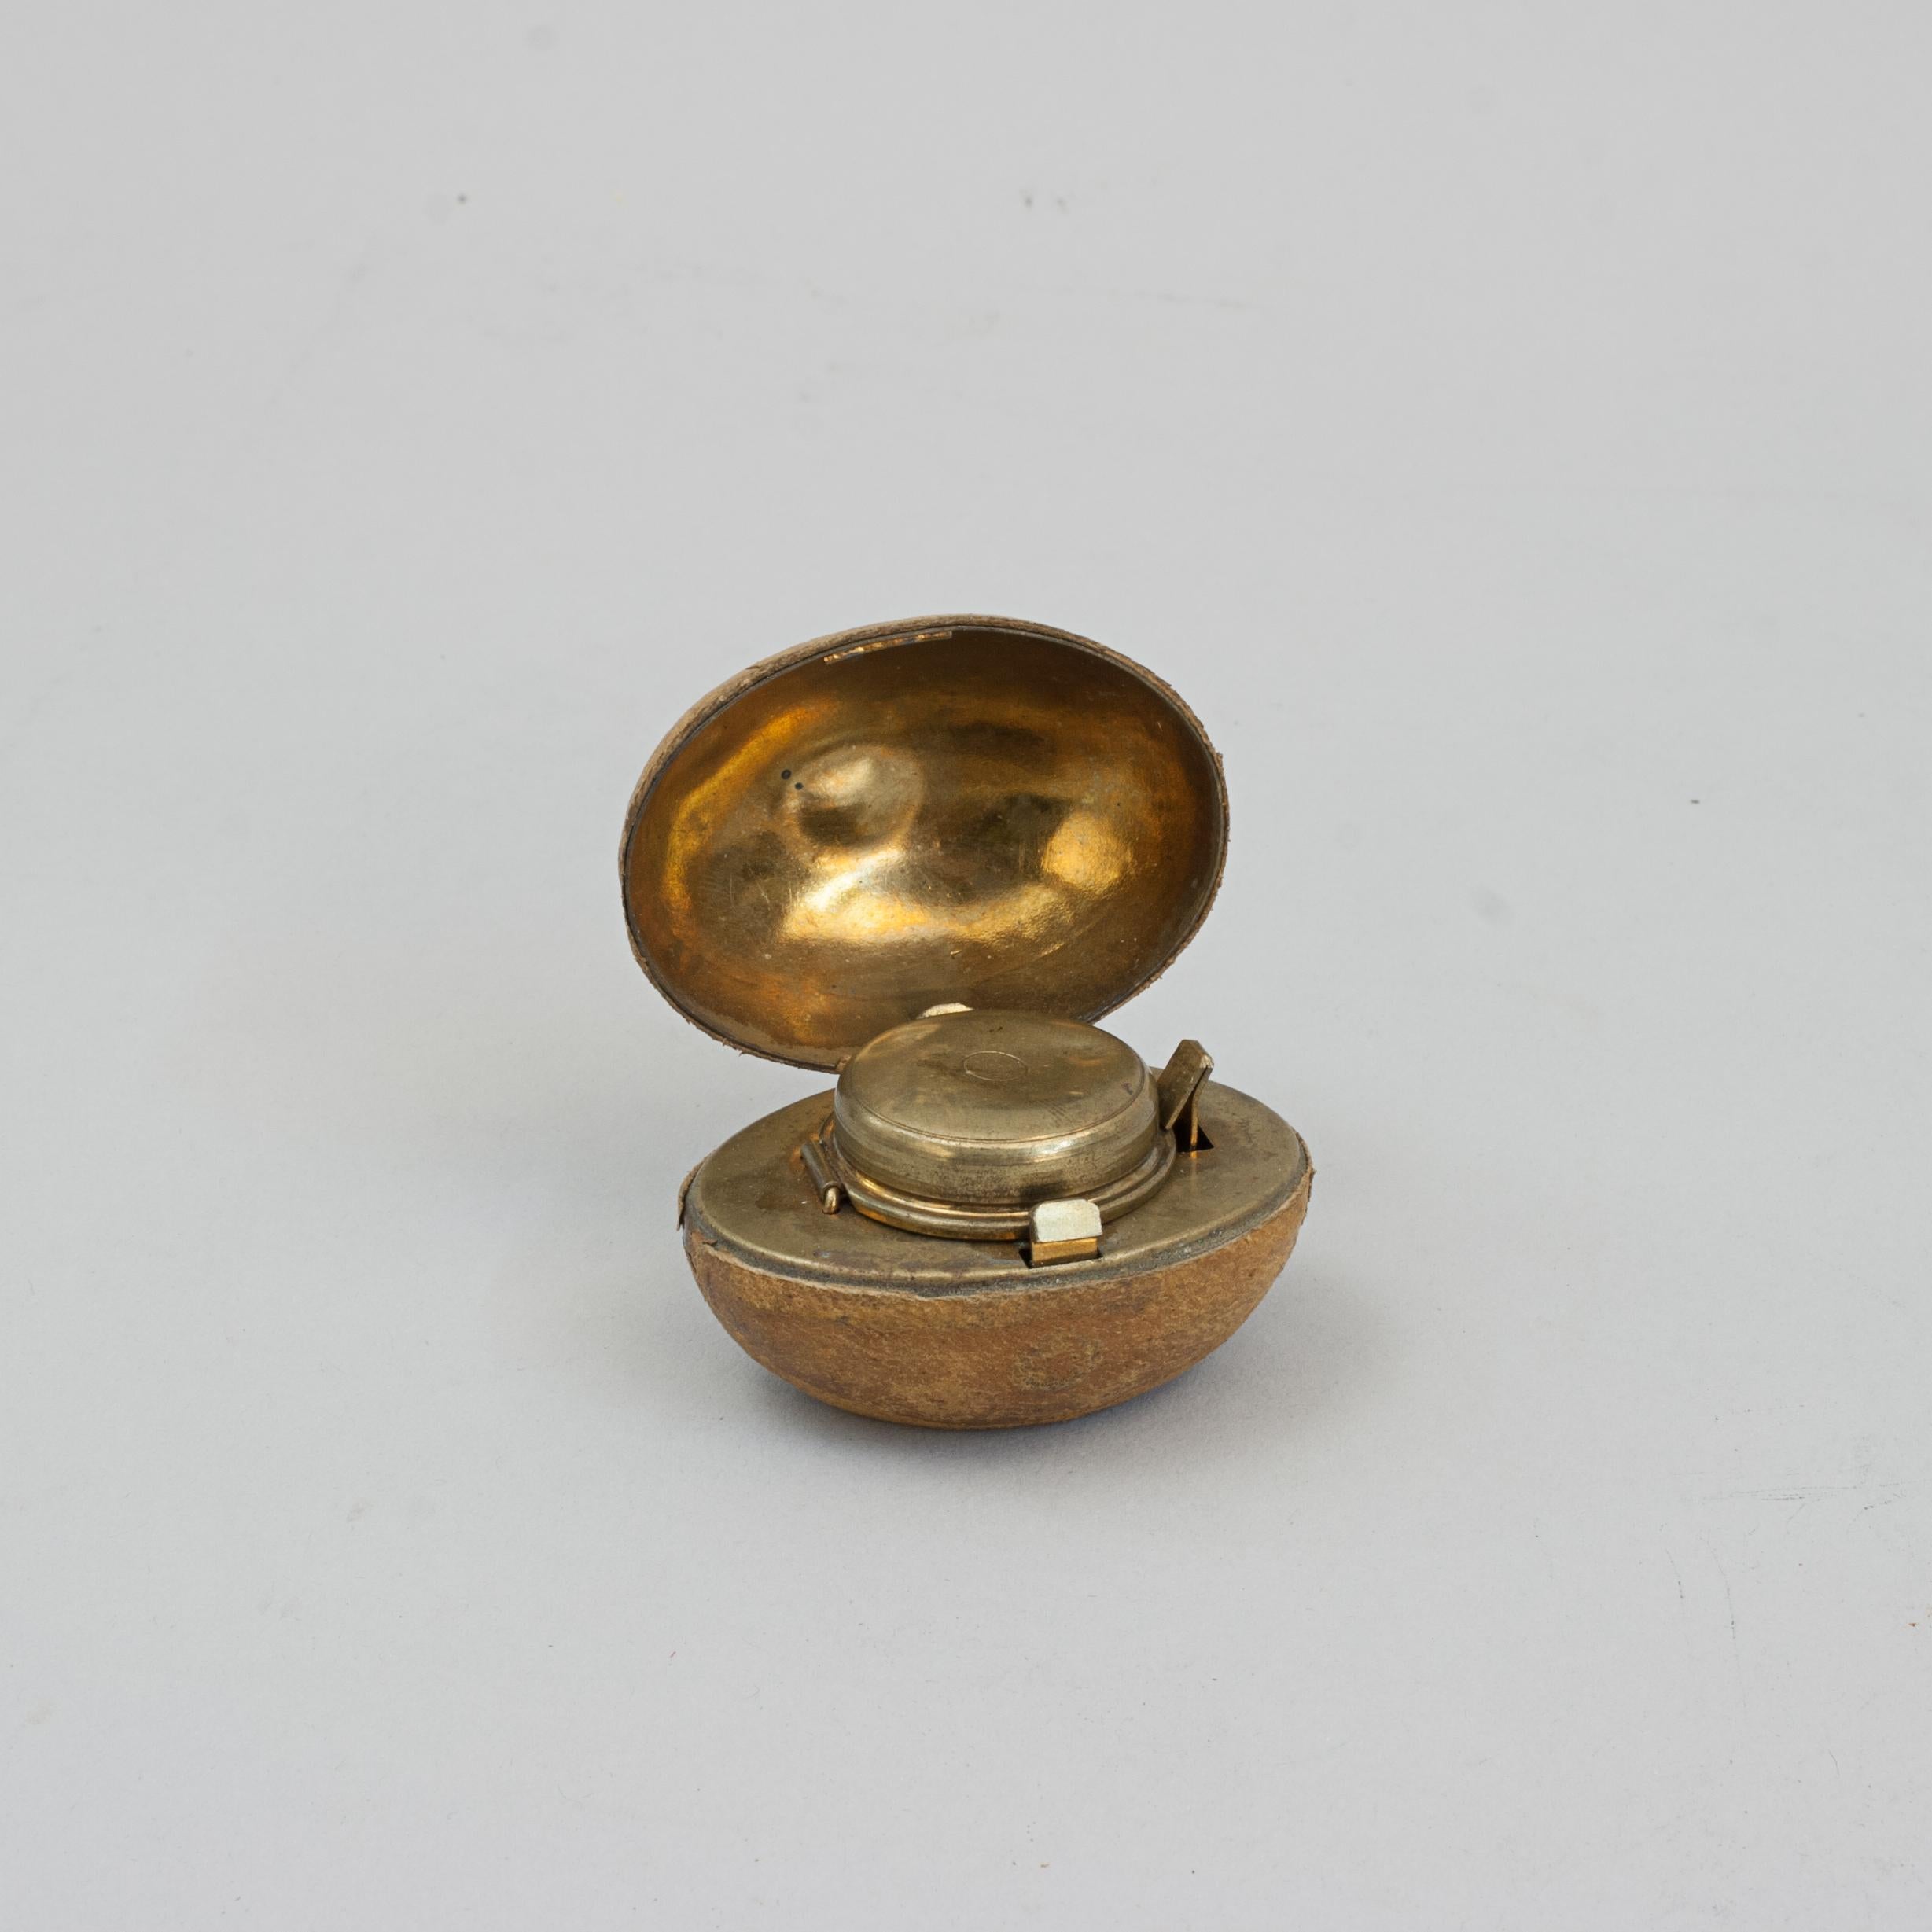 Rare Novelty Rugby Inkwell.
A wonderful leather covered travelling inkwell in the shape of a rugby ball. This is a very desirable, rare and unusual object made from brass and covered in imprinted leather to imitate a ball. It is hinged in the centre